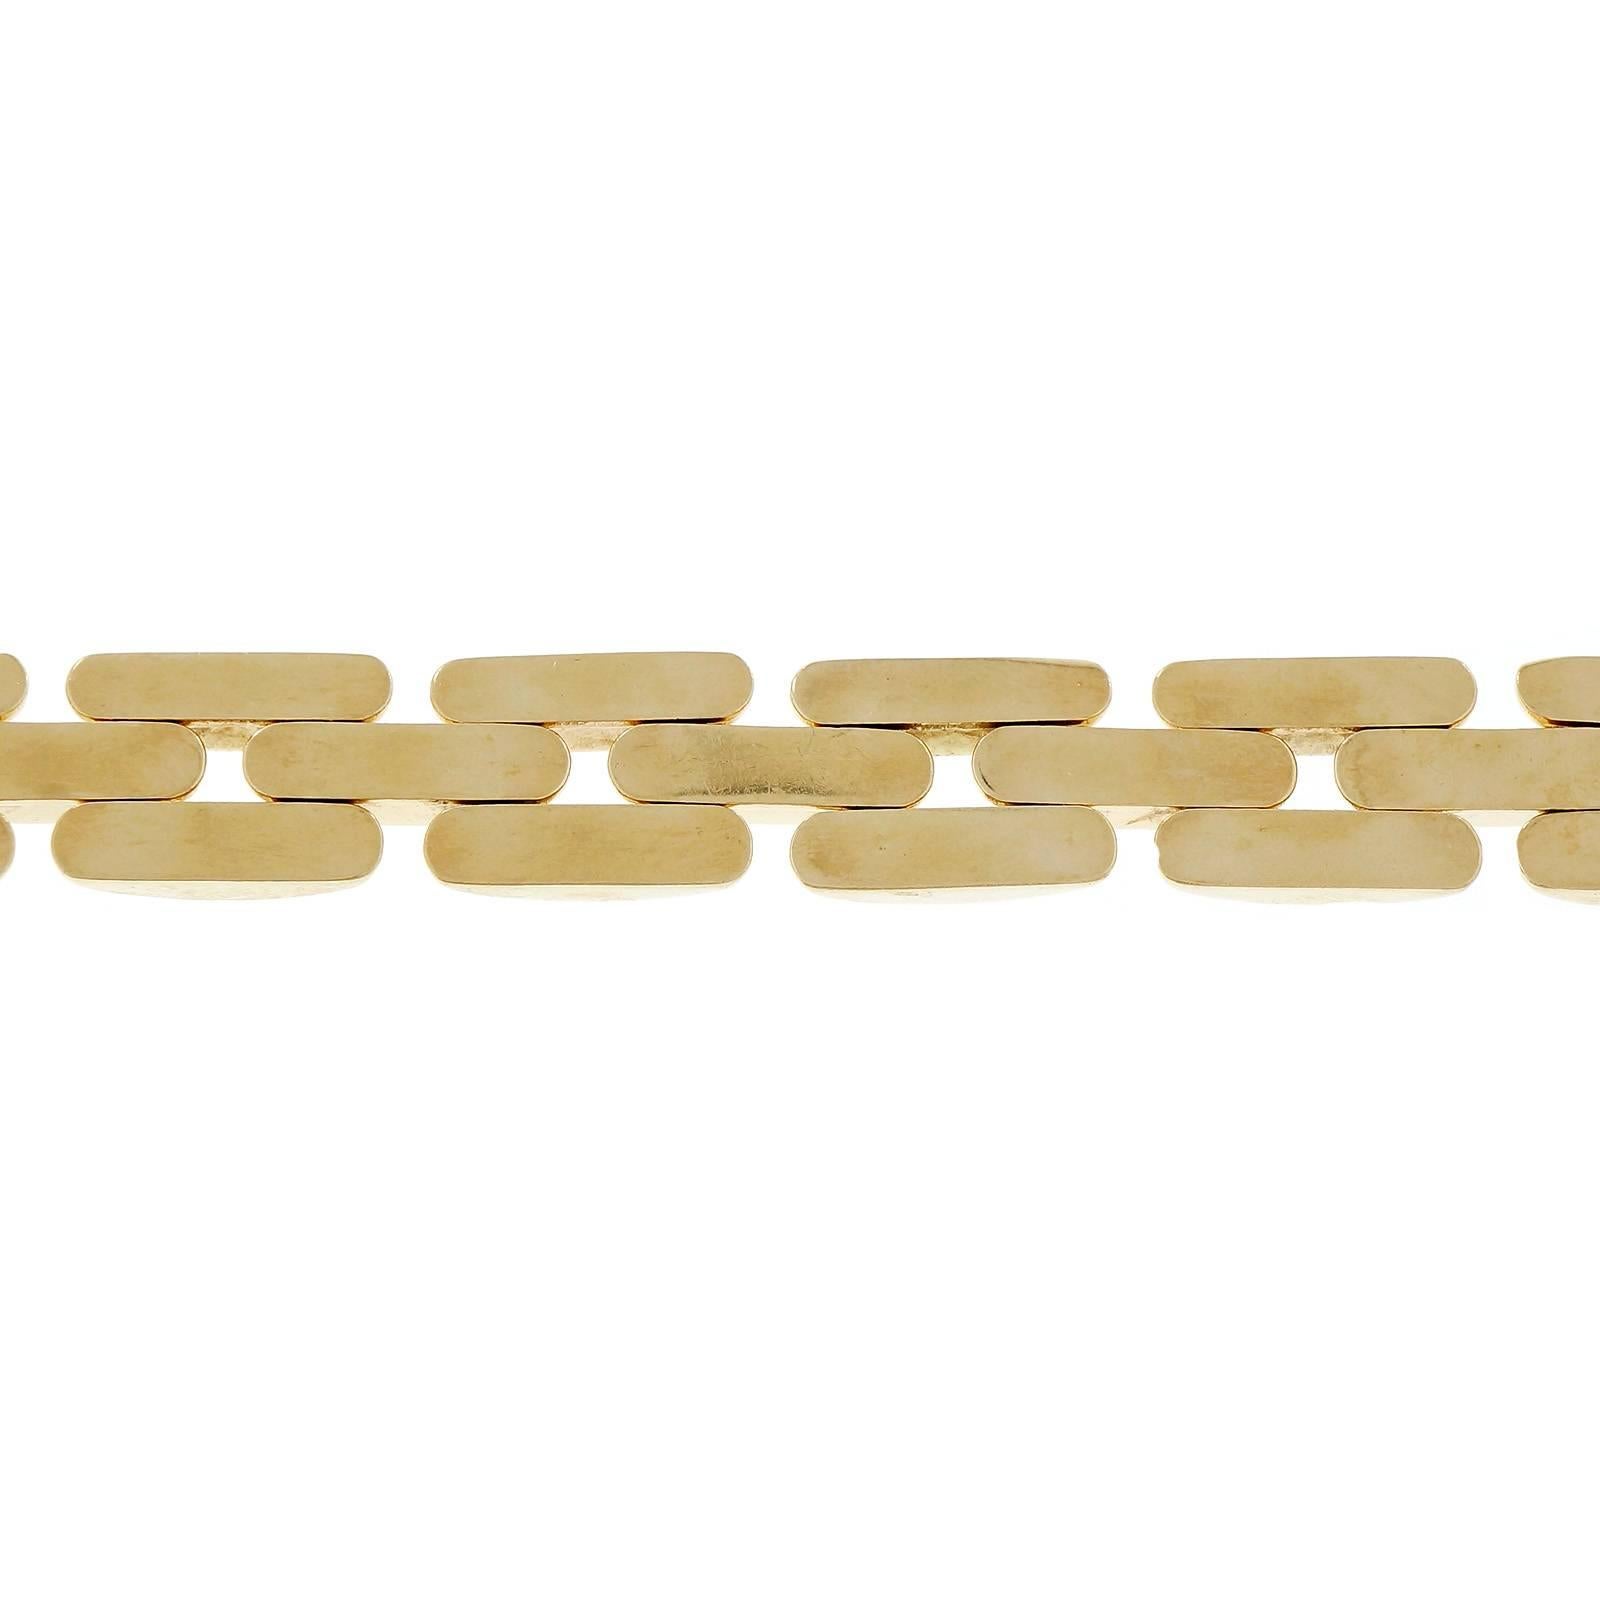 Vintage 1960’s 3 row 14k yellow gold track faceted bracelet. Hollow construction.

14k yellow gold
28.5 grams
Tested and stamped: 14k
Hallmark: JW Italy
Length: 7.25 inches – Width: 13.52mm – Depth: 4.52mm
